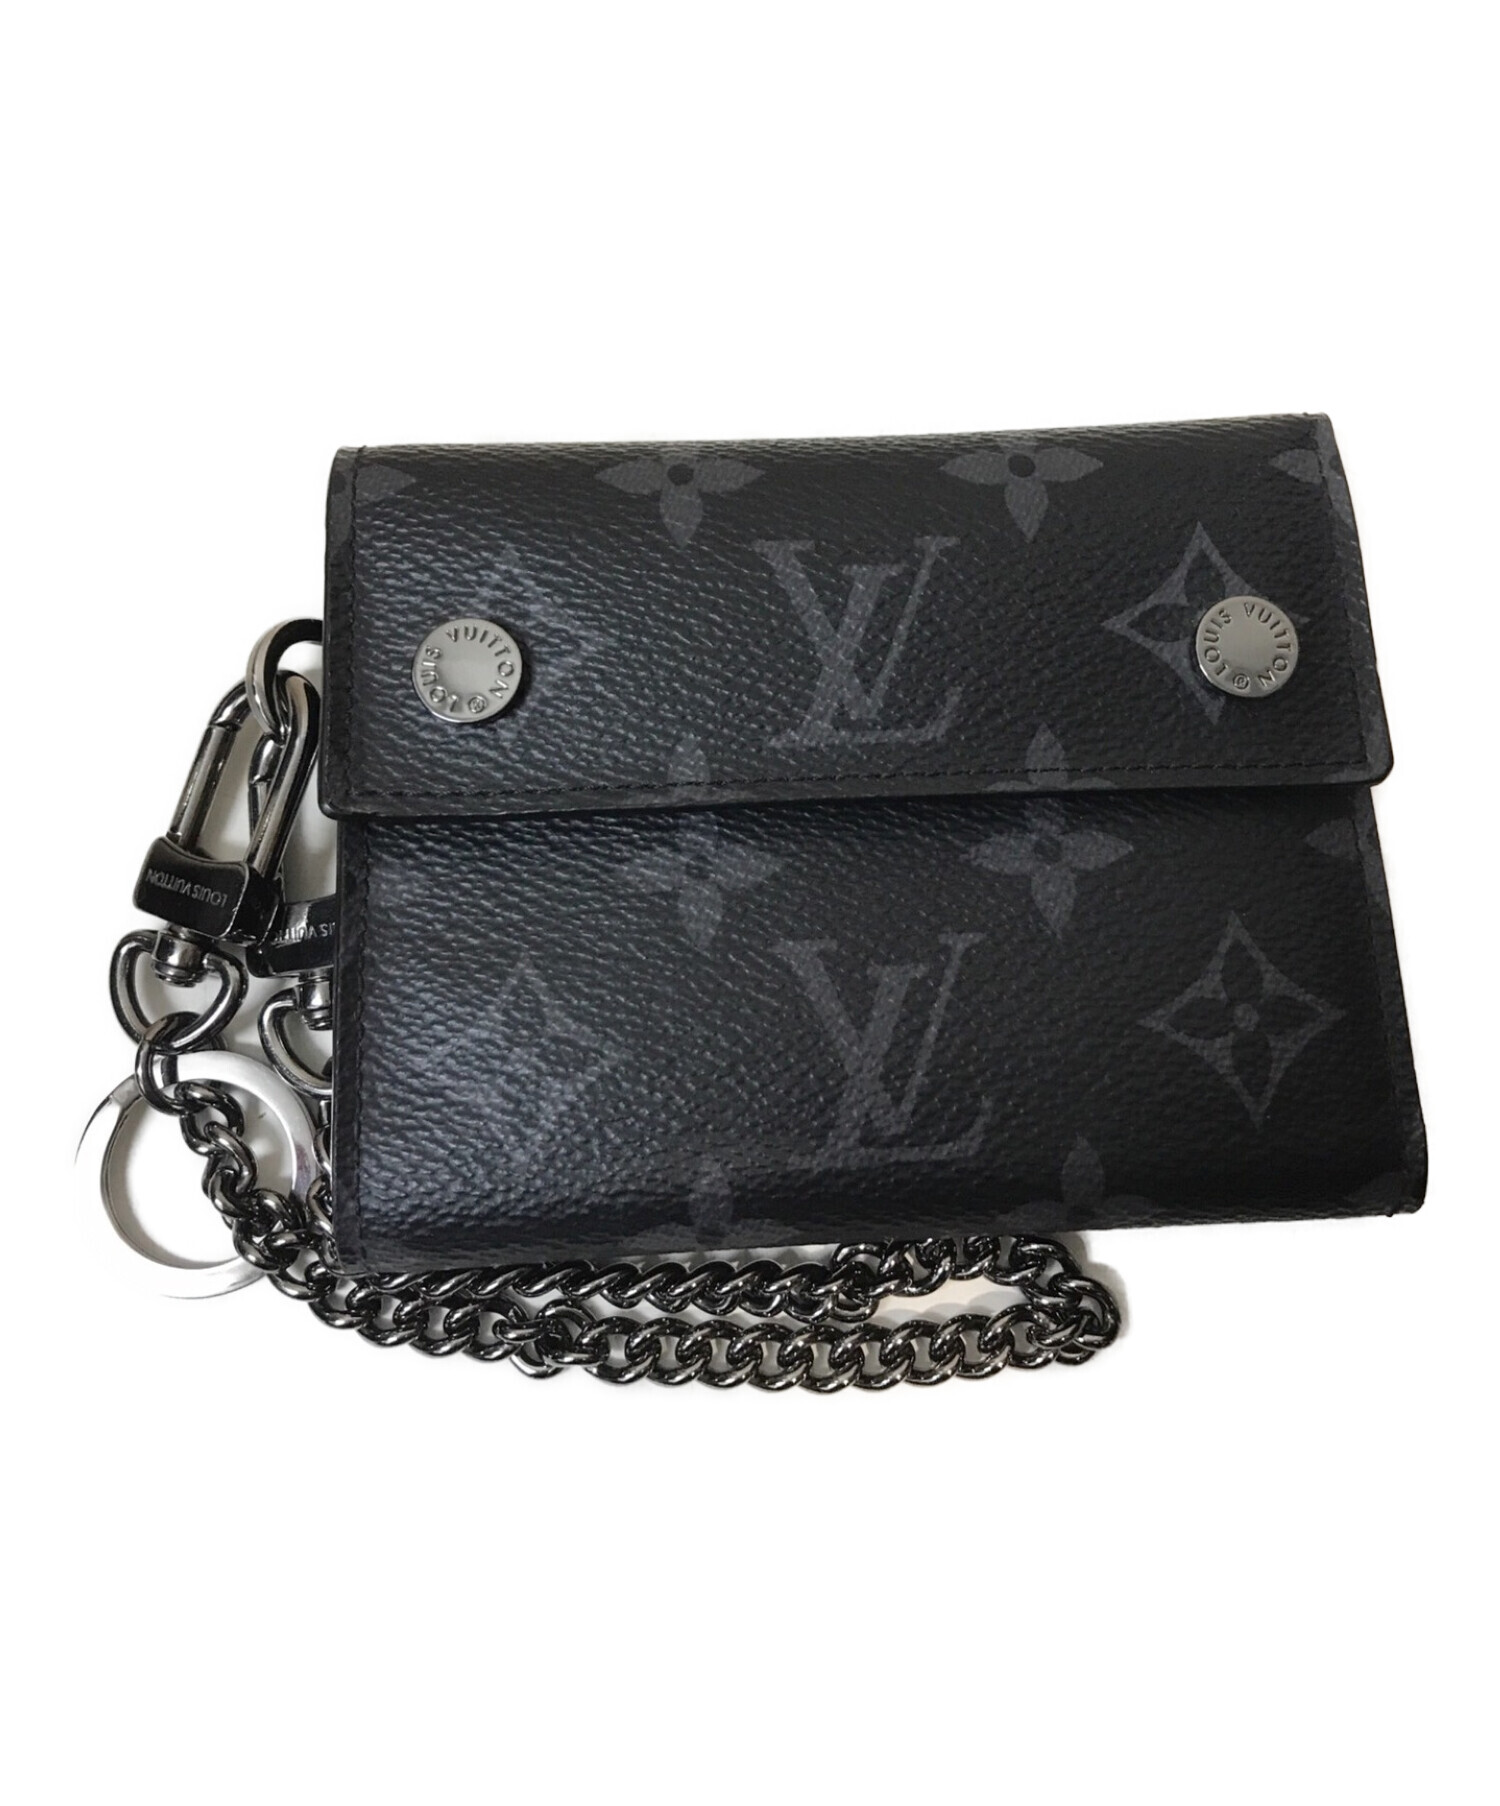 LOUIS VUITTON チェーン・コンパクトウォレット